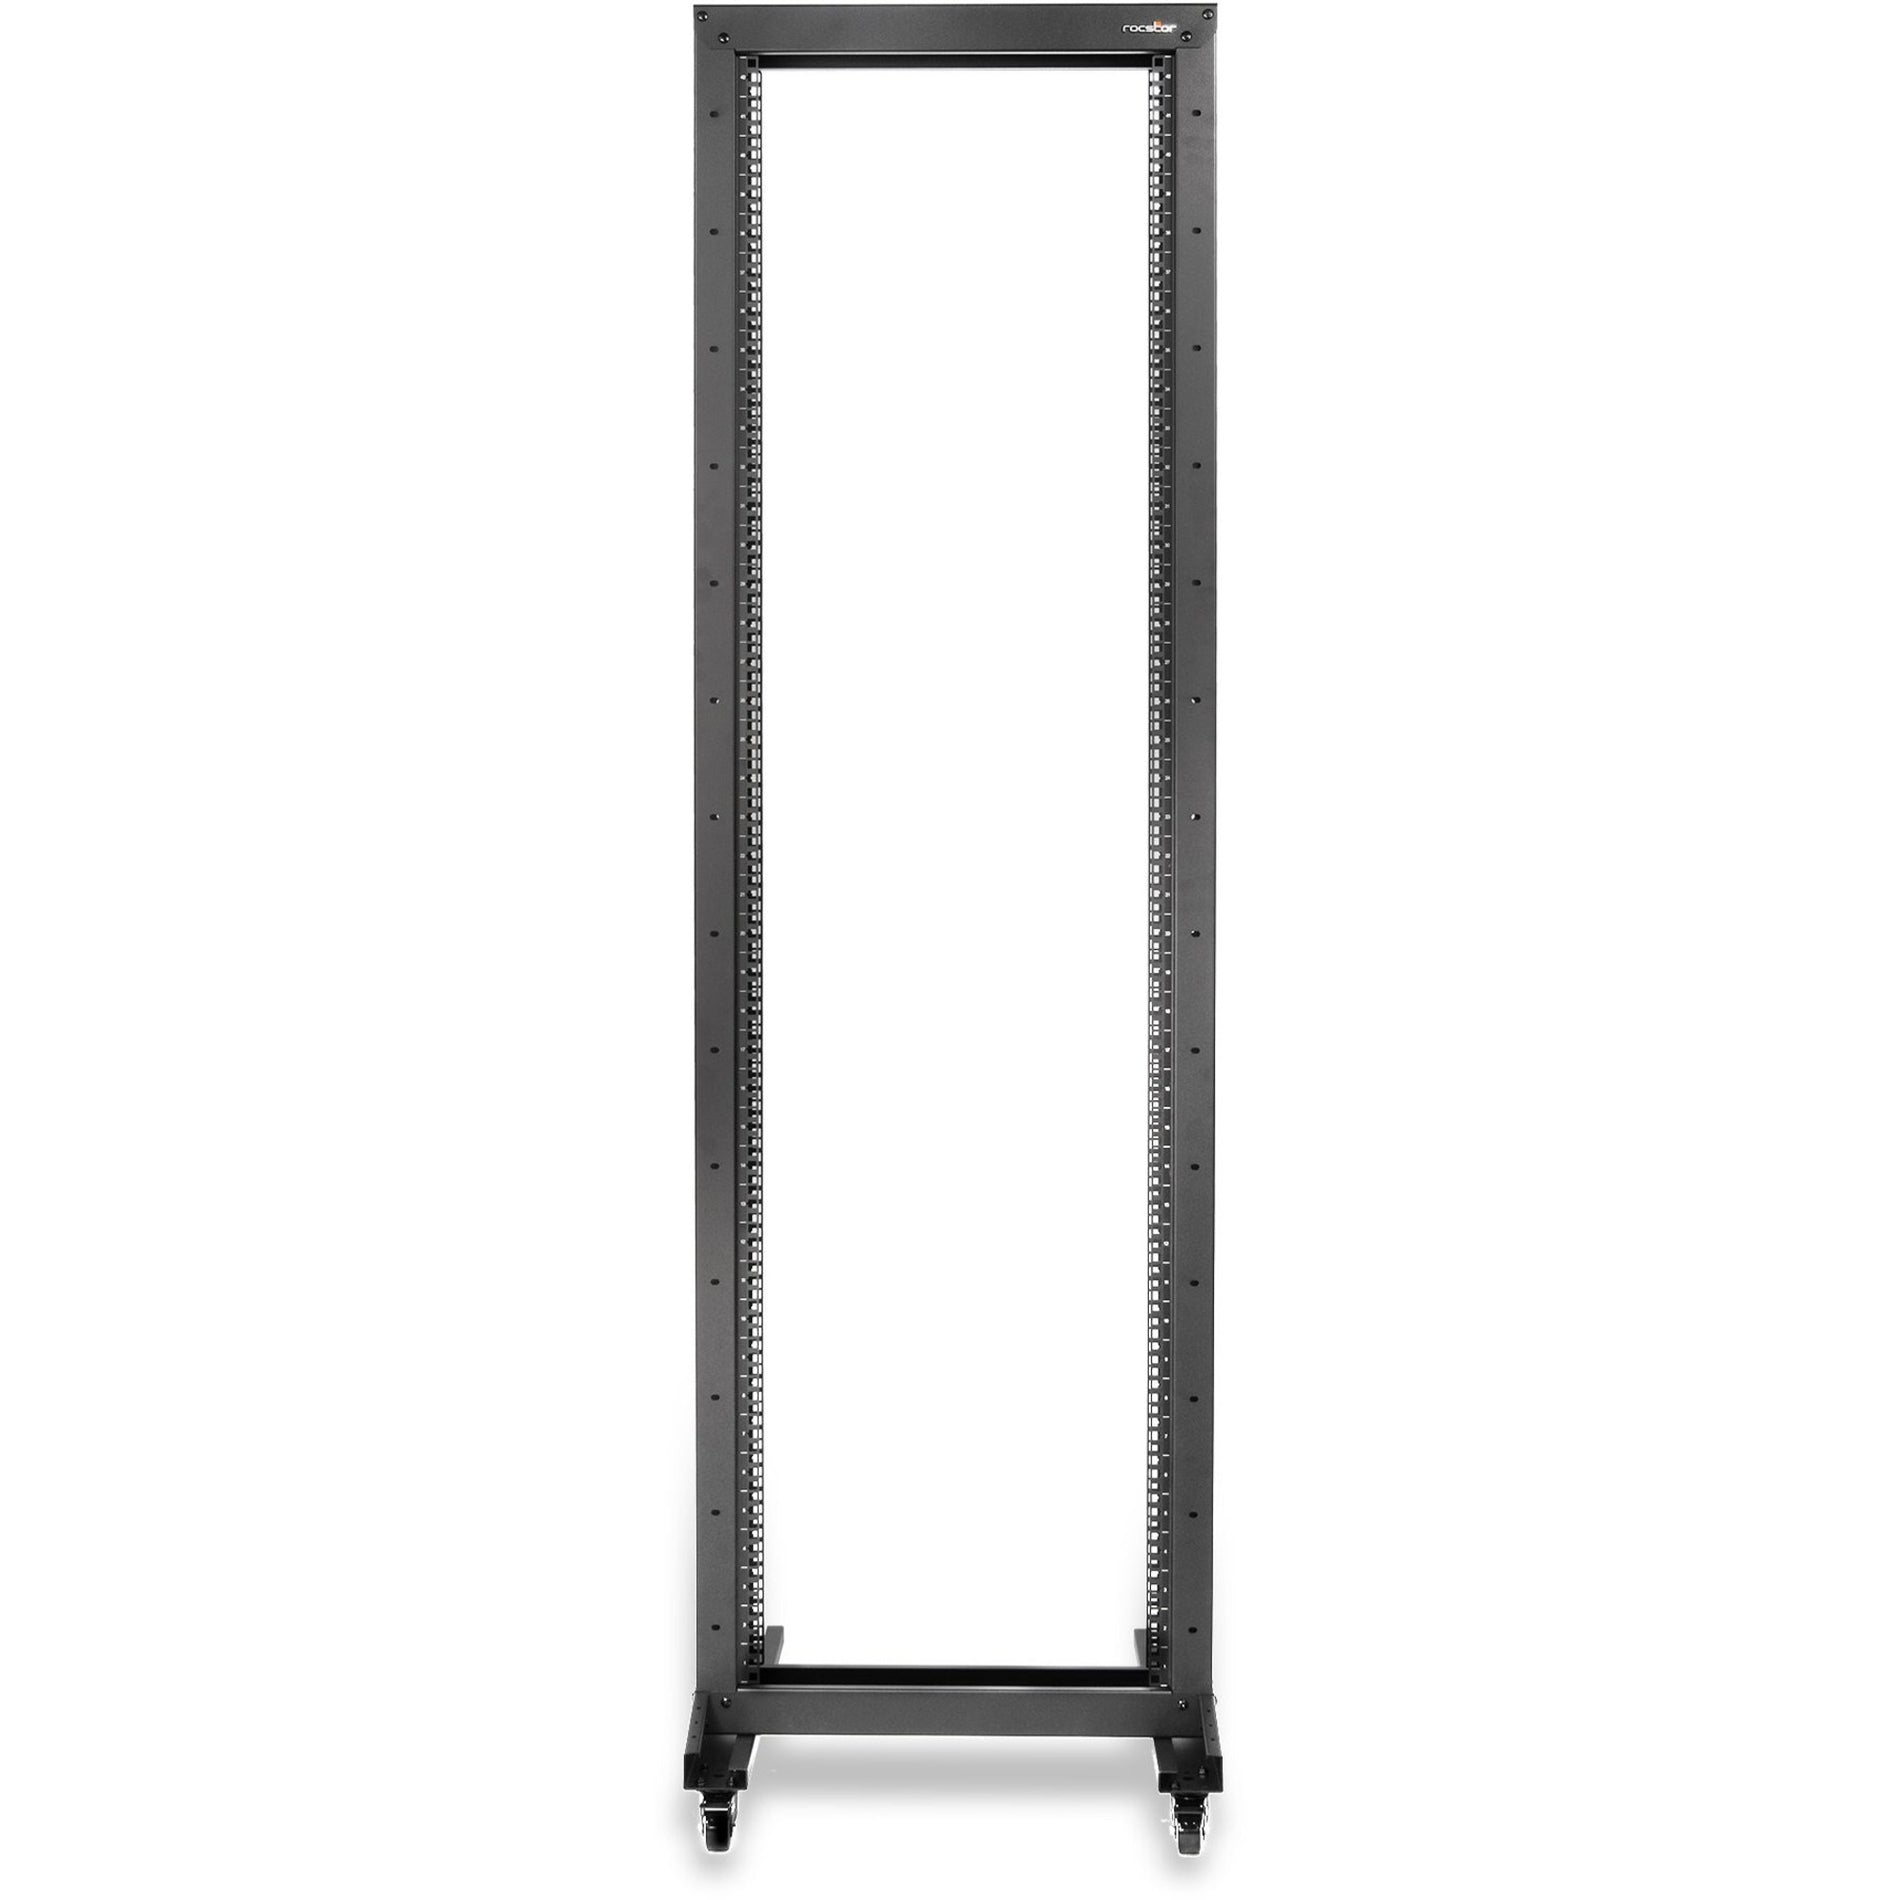 Rocstor Y10E030-B1 SolidRack 2-Post Server Rack With Casters - 42U, Heavy Duty, Open Frame, Network Equipment, Switch, Server, Patch Panel, Router, KVM Switch, LAN Switch